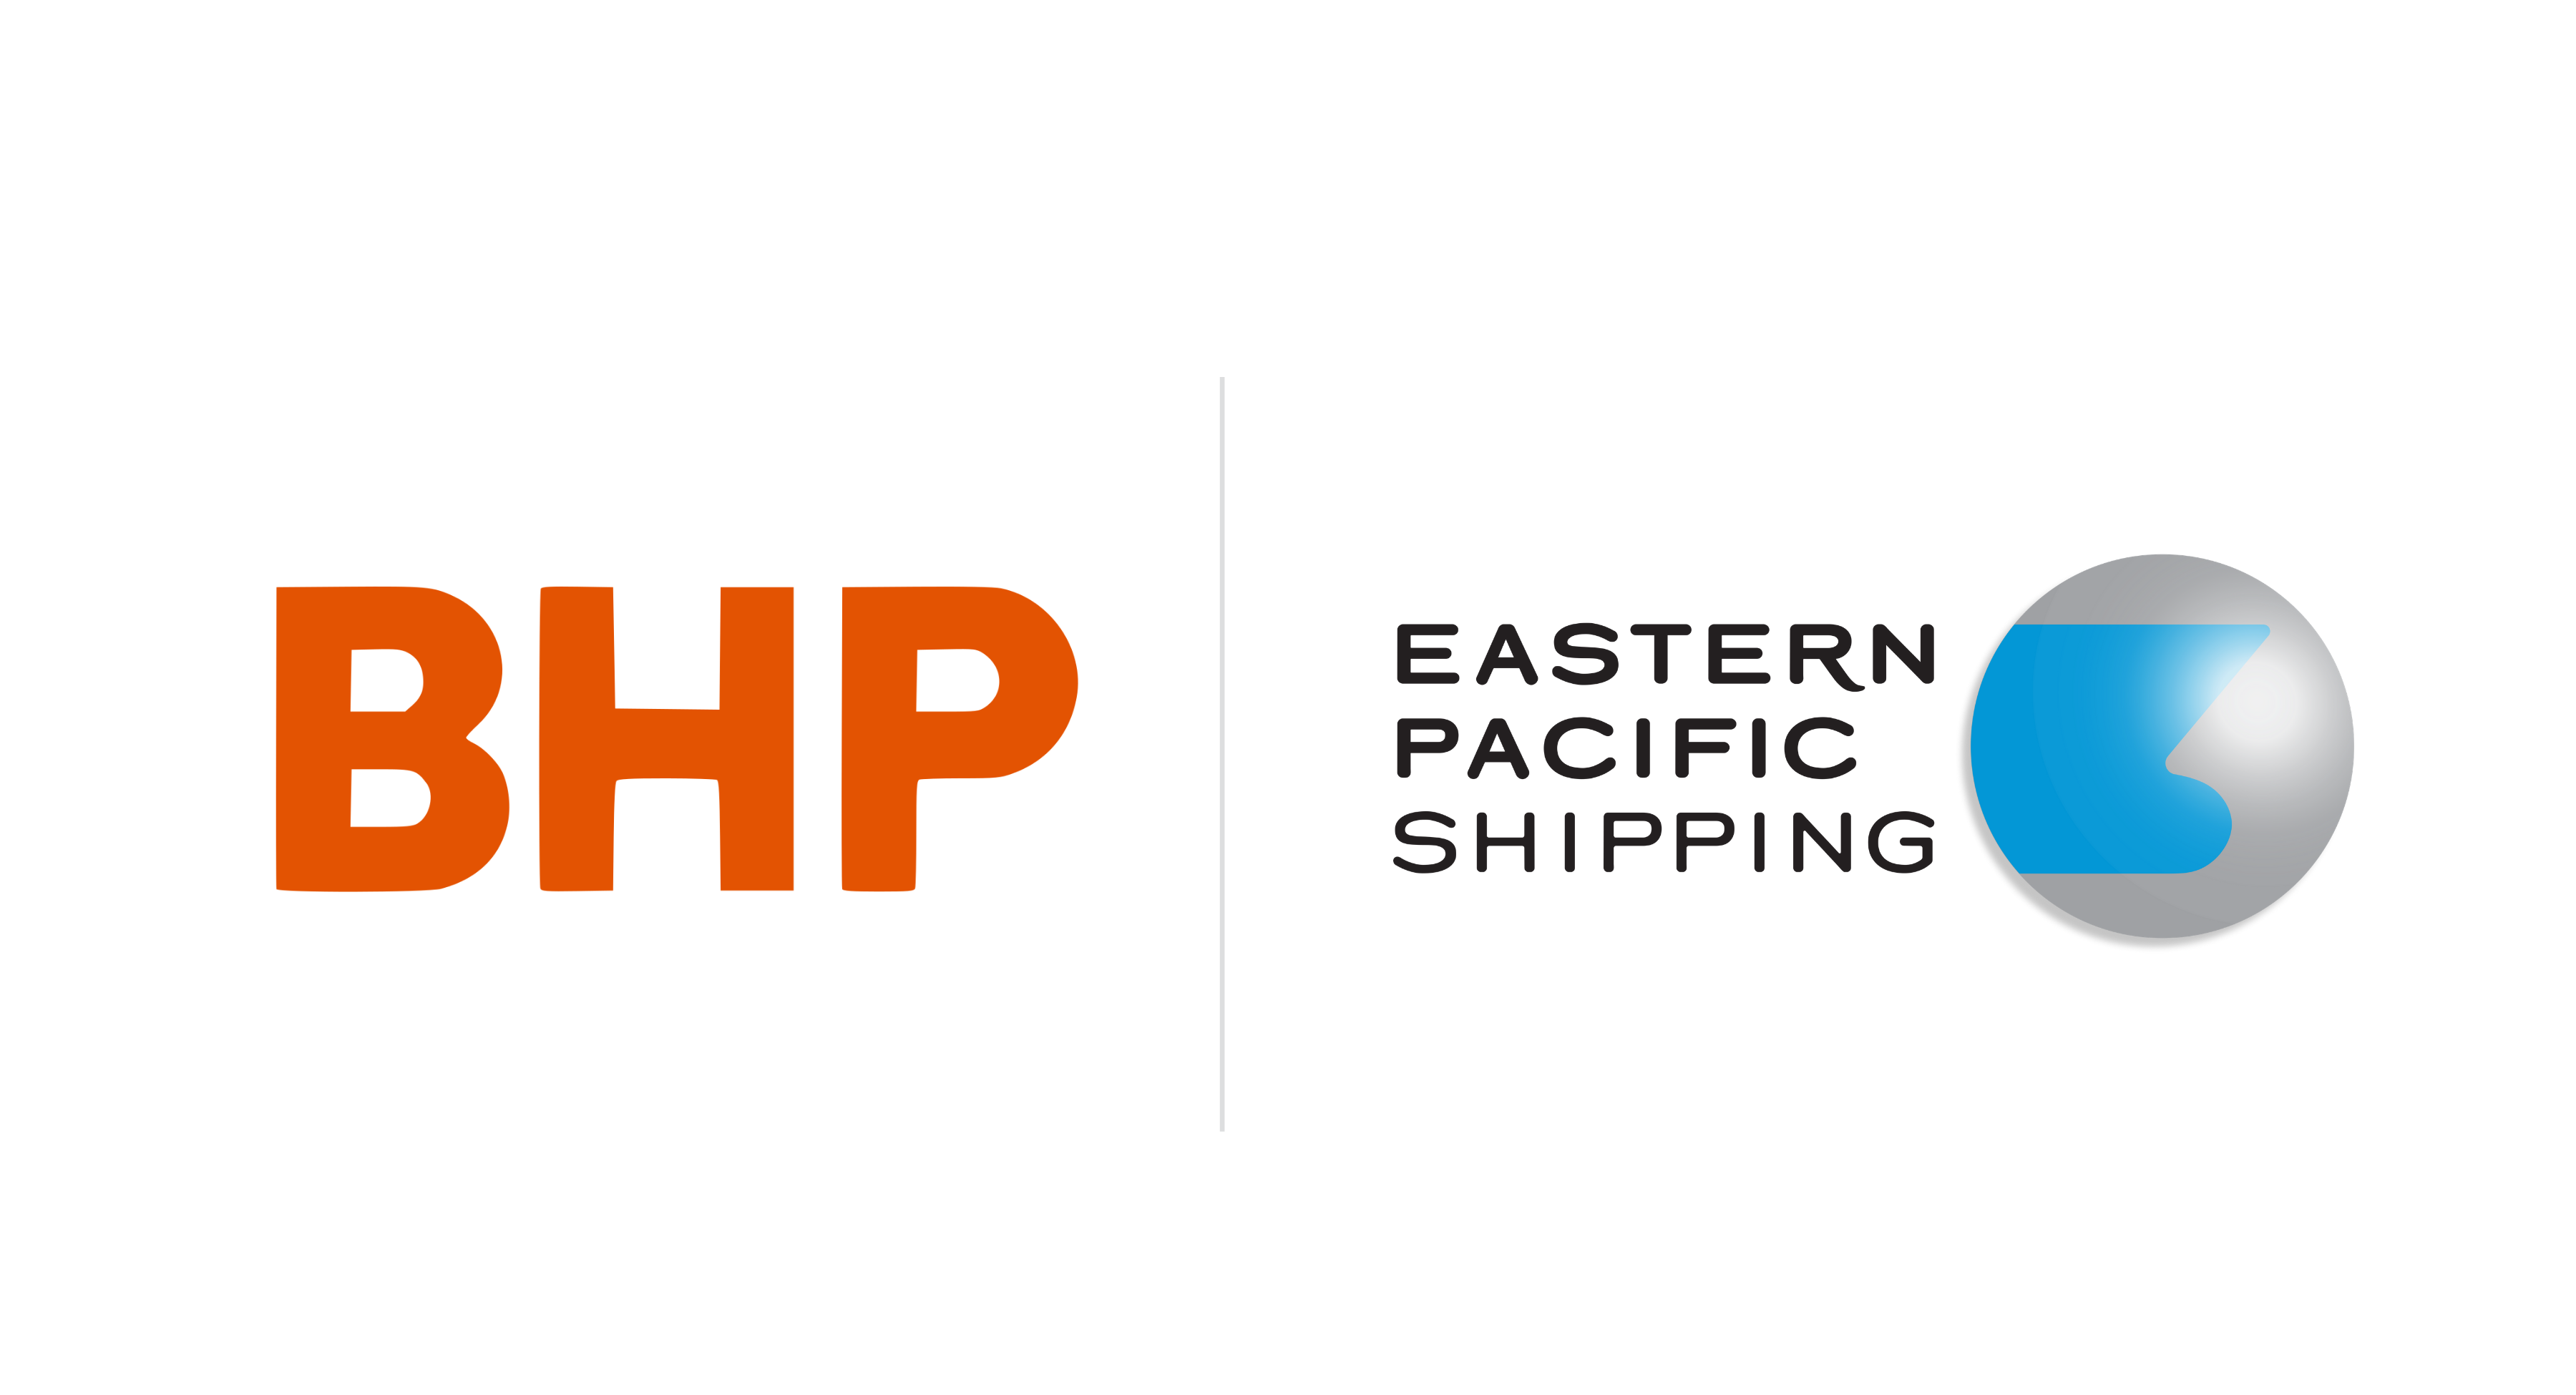 EPS inks world’s first dry bulk LNG dual fuel charter with BHP